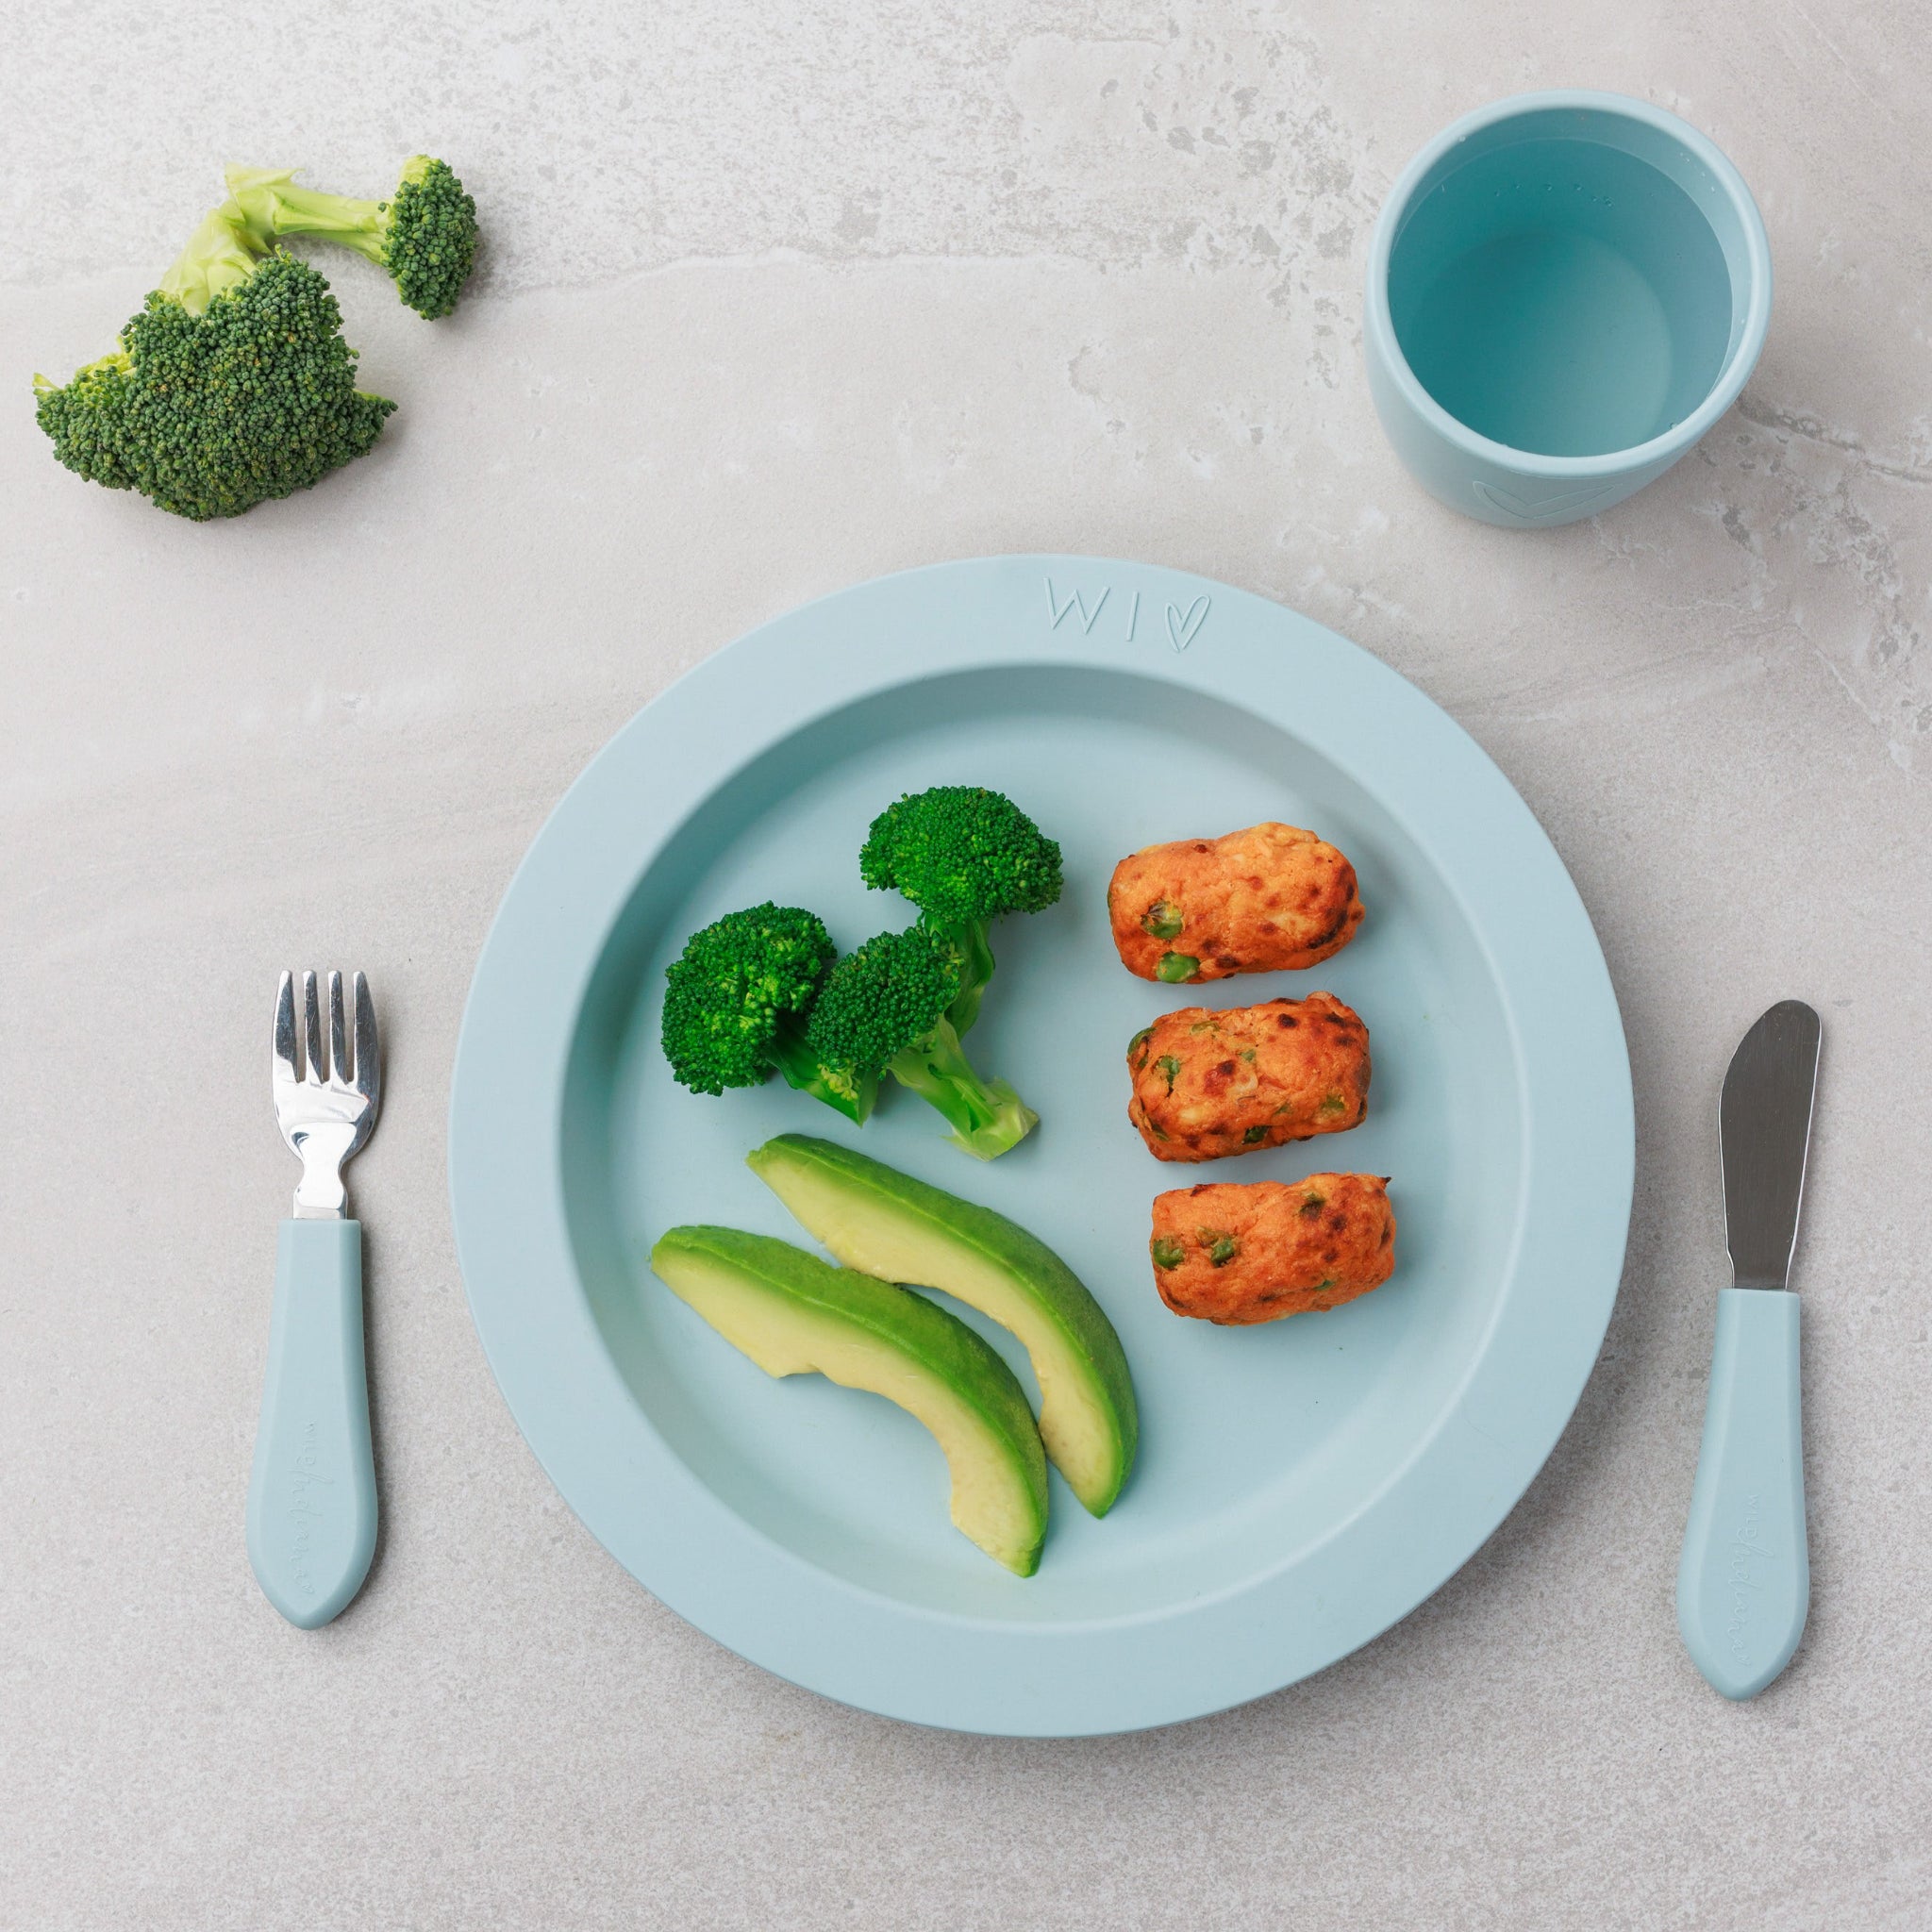 A plate of Sweet Potato Salmon Bites paired with sides of green veggies from Audrey and Alfie's Finger Food Range